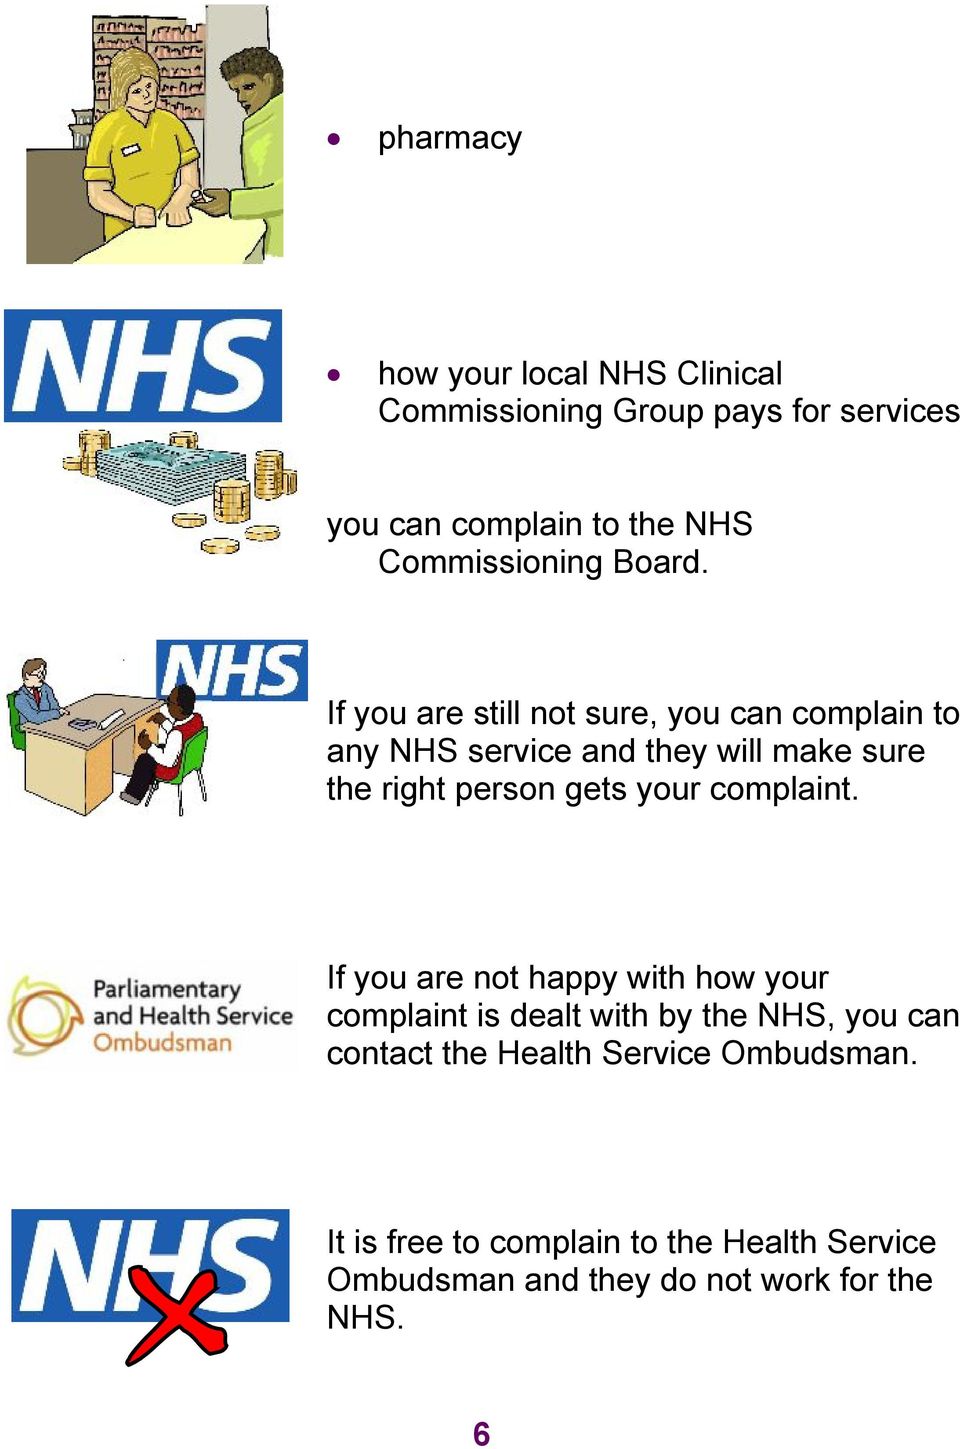 If you are still not sure, you can complain to any NHS service and they will make sure the right person gets your